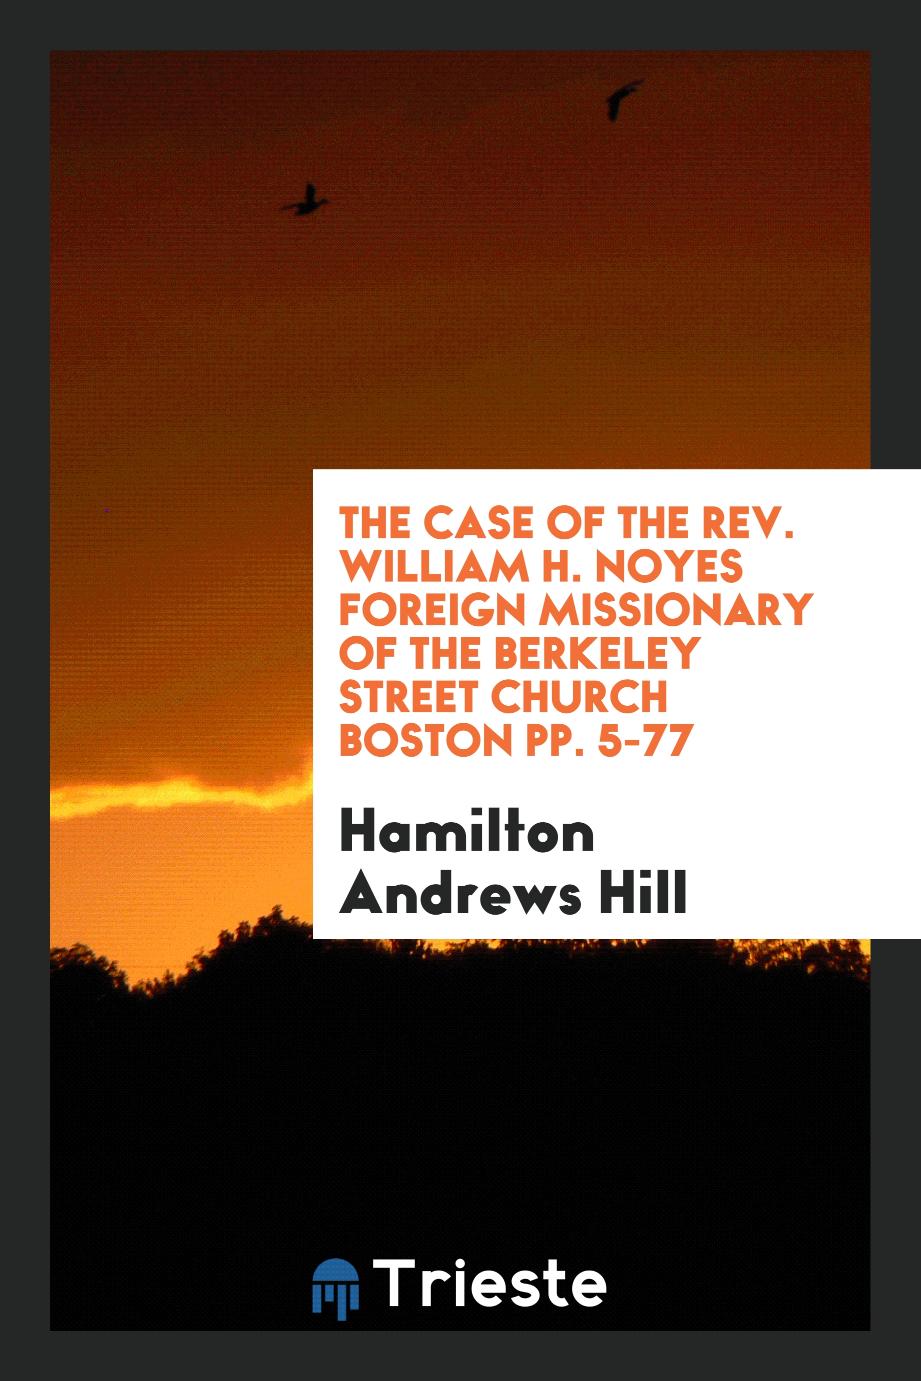 The Case of the Rev. William H. Noyes Foreign Missionary of the Berkeley street church Boston pp. 5-77